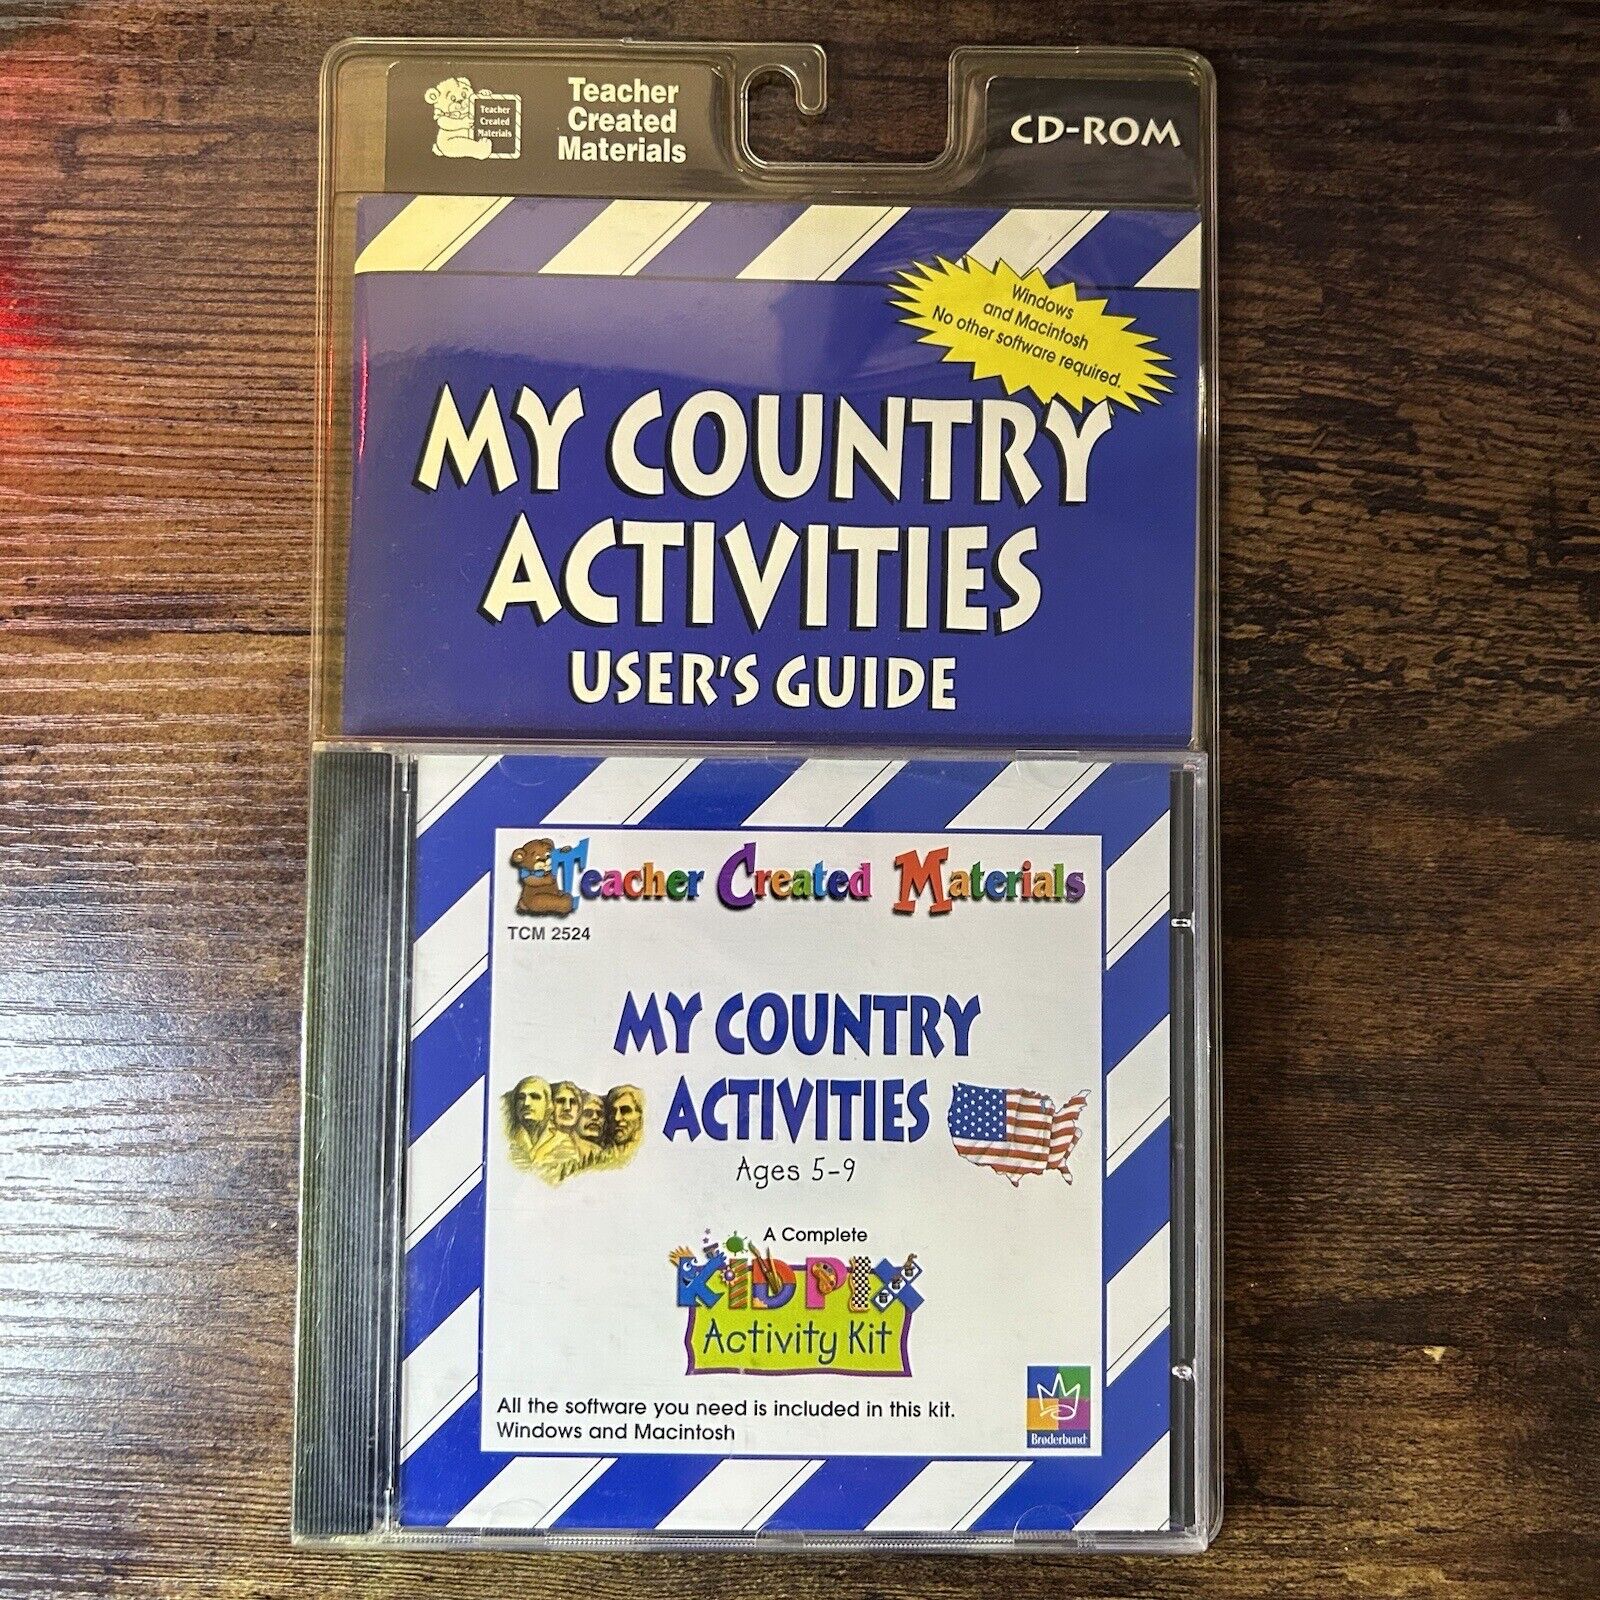 My Country Activities New CD Rom Teacher Created Materials Activity Kit 1999